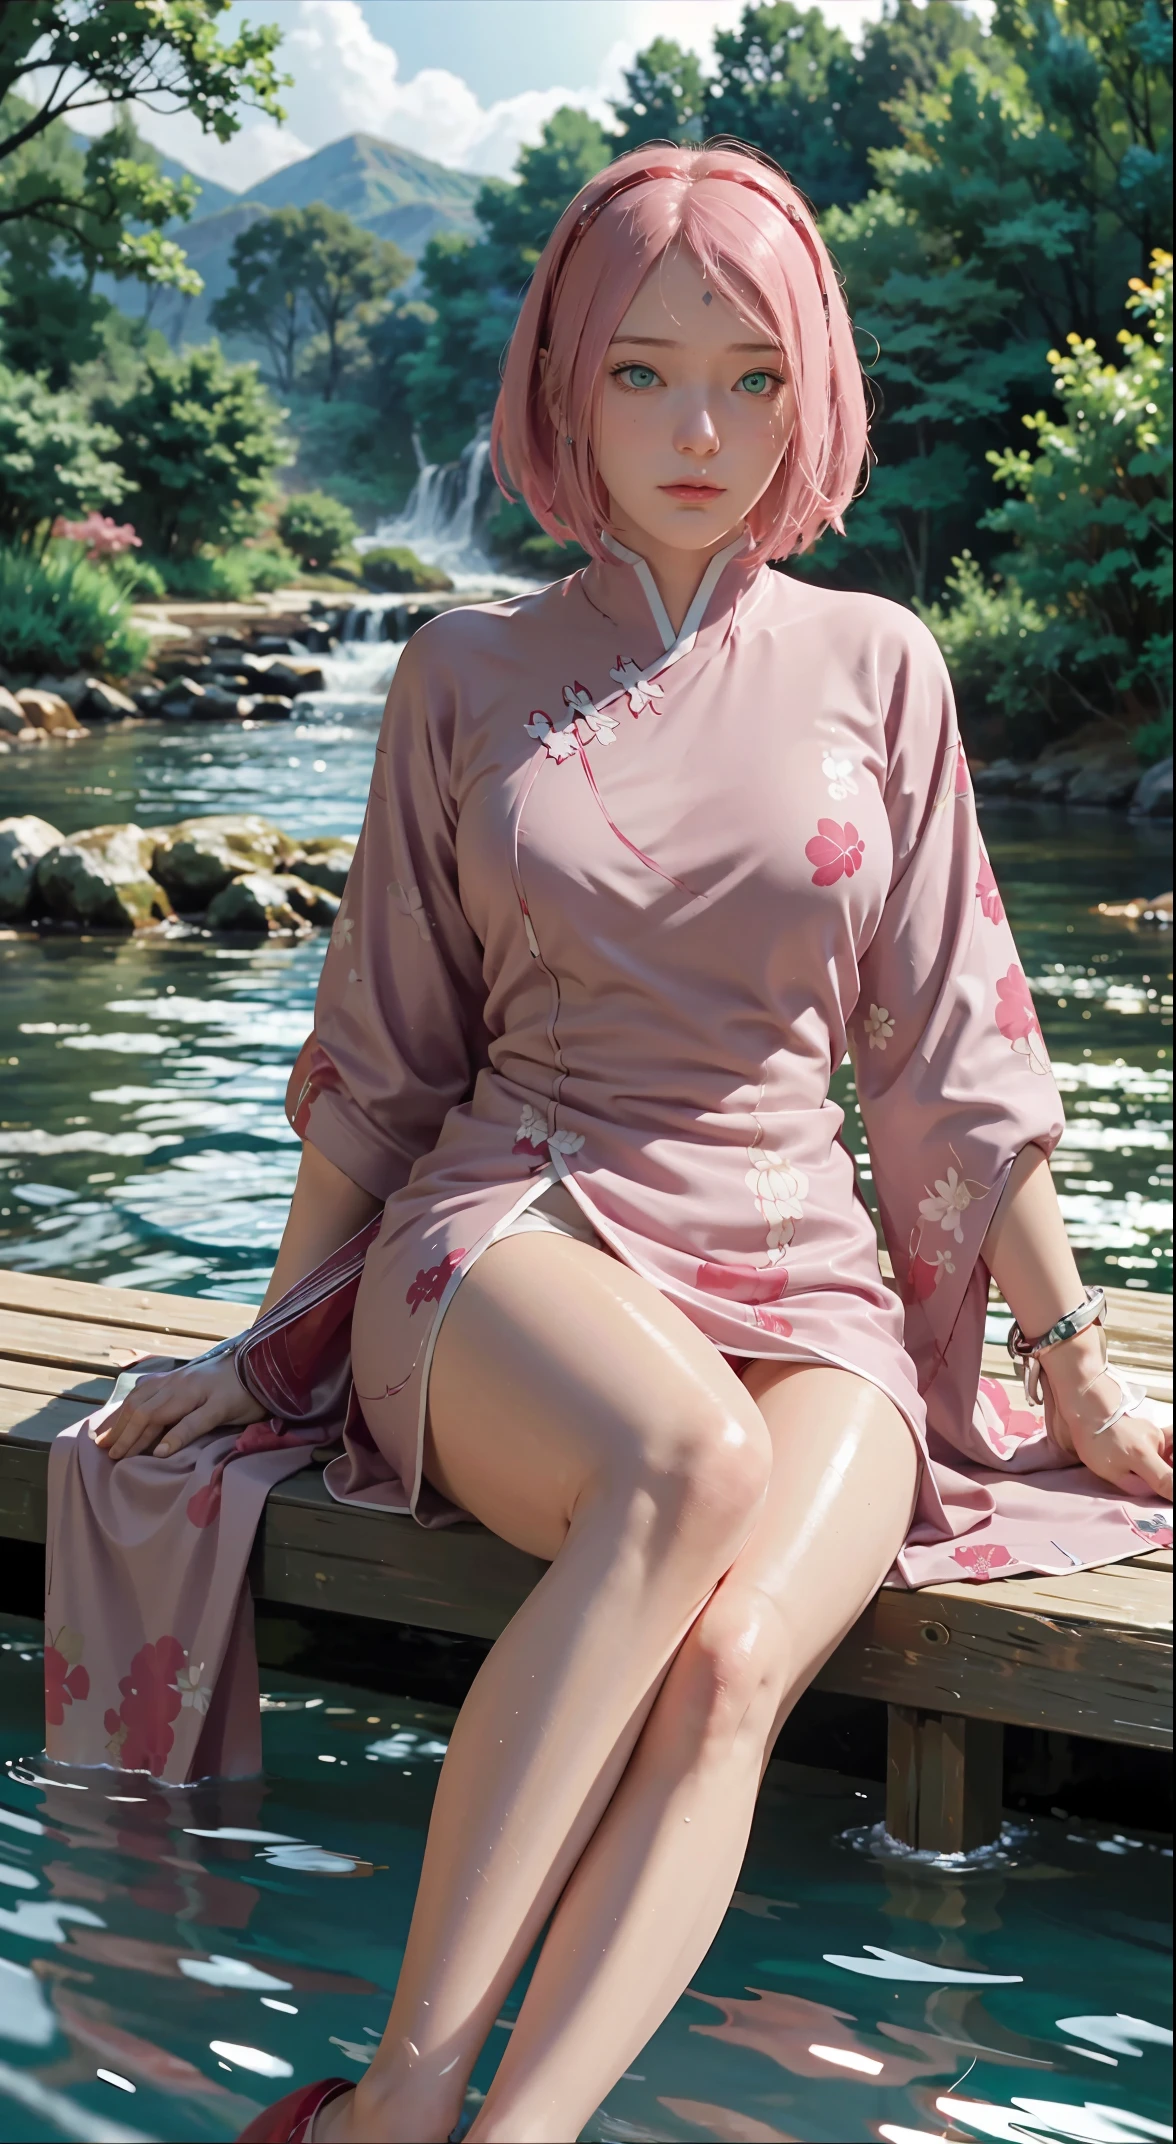 Sitting on a bridge full of river lanterns, feet playing in the water, the art depicts a charming woman dressed in a sakura flowing, silky traditional oriental dress, pink, decorated with intricate patterns and bright colors. Her dress drapes elegantly over her curvy figure, accentuating her seductive silhouette. She sits gracefully by the tranquil lotus lake, her feet playing in the water, bathed in the soft glow of the moonlight. The scene exudes an ethereal and dreamy atmosphere, with a touch of mystery and sexiness. The graphic style blends watercolor and digital illustration techniques to evoke a refined beauty and charm. The lights are filled with soft moonlight, casting soft highlights and shadows on her charming features. Bare thighs, big breasts, three-dimensional facial features, sitting, upturned legs, side braids , beautiful girl long pink hair and green eyes looks like sakura haruno from naruto